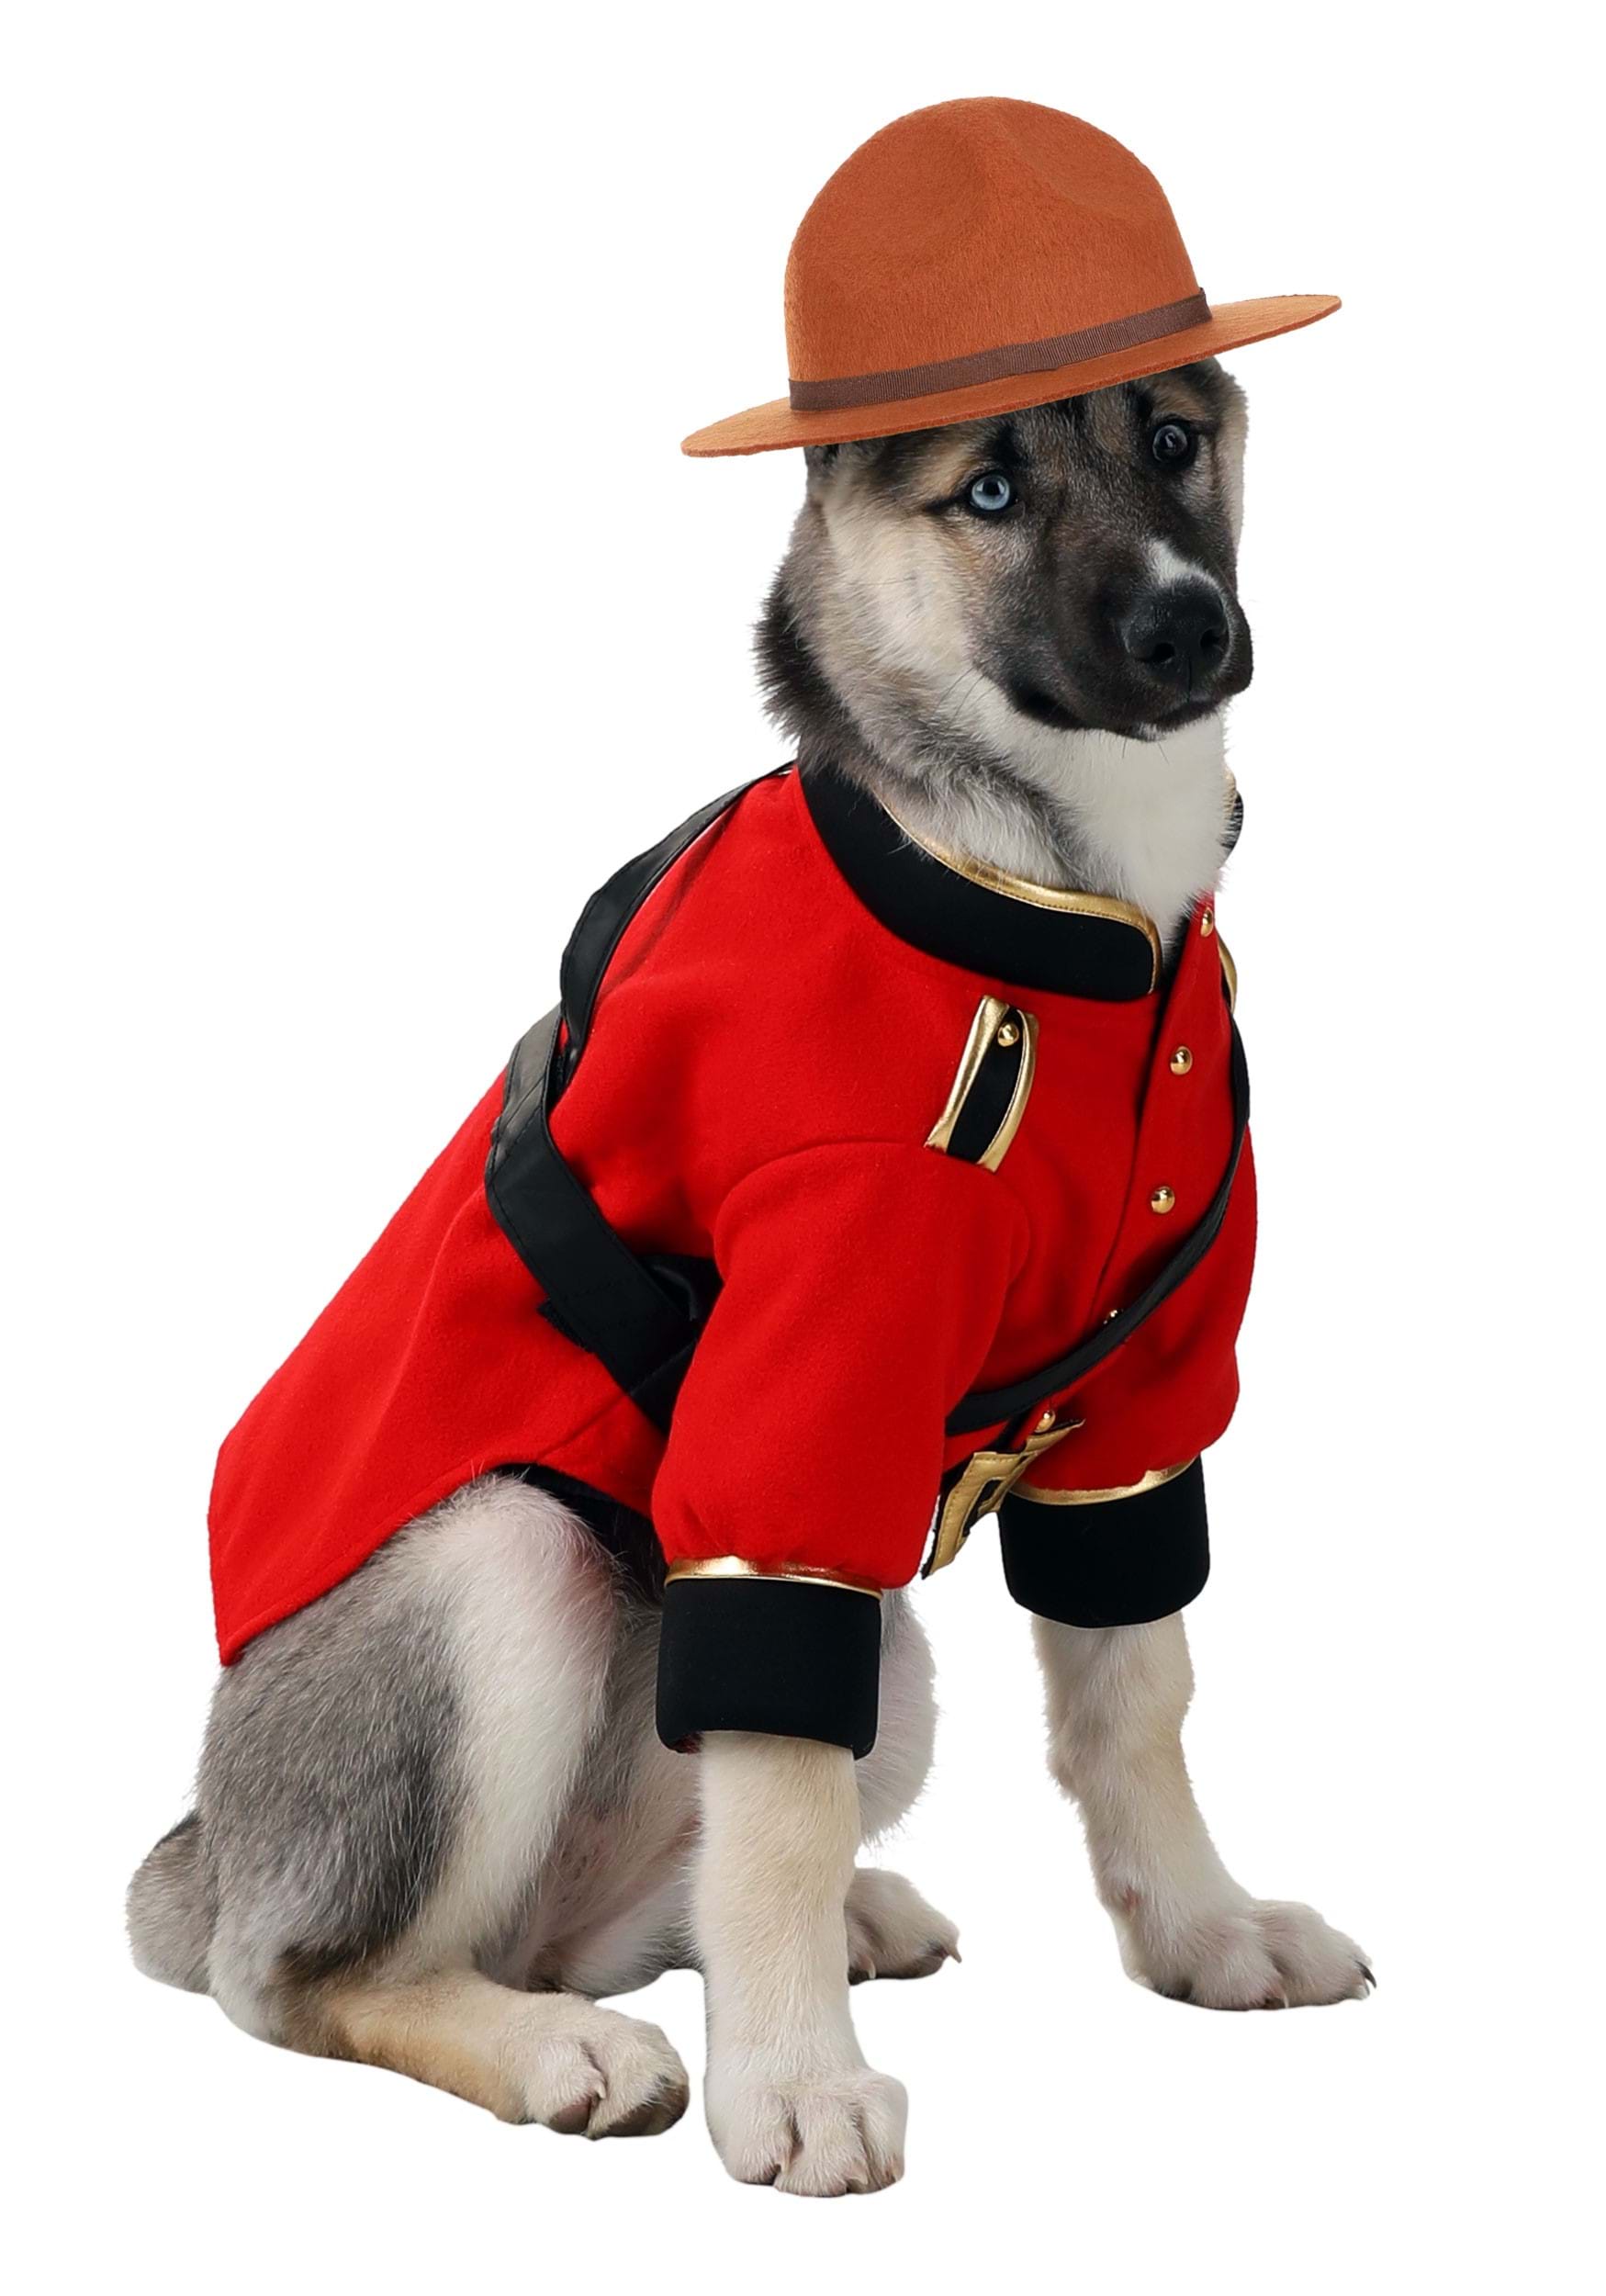 Photos - Fancy Dress FUN Costumes Mountie Costume for Dogs Black/Yellow/Red FUN3591